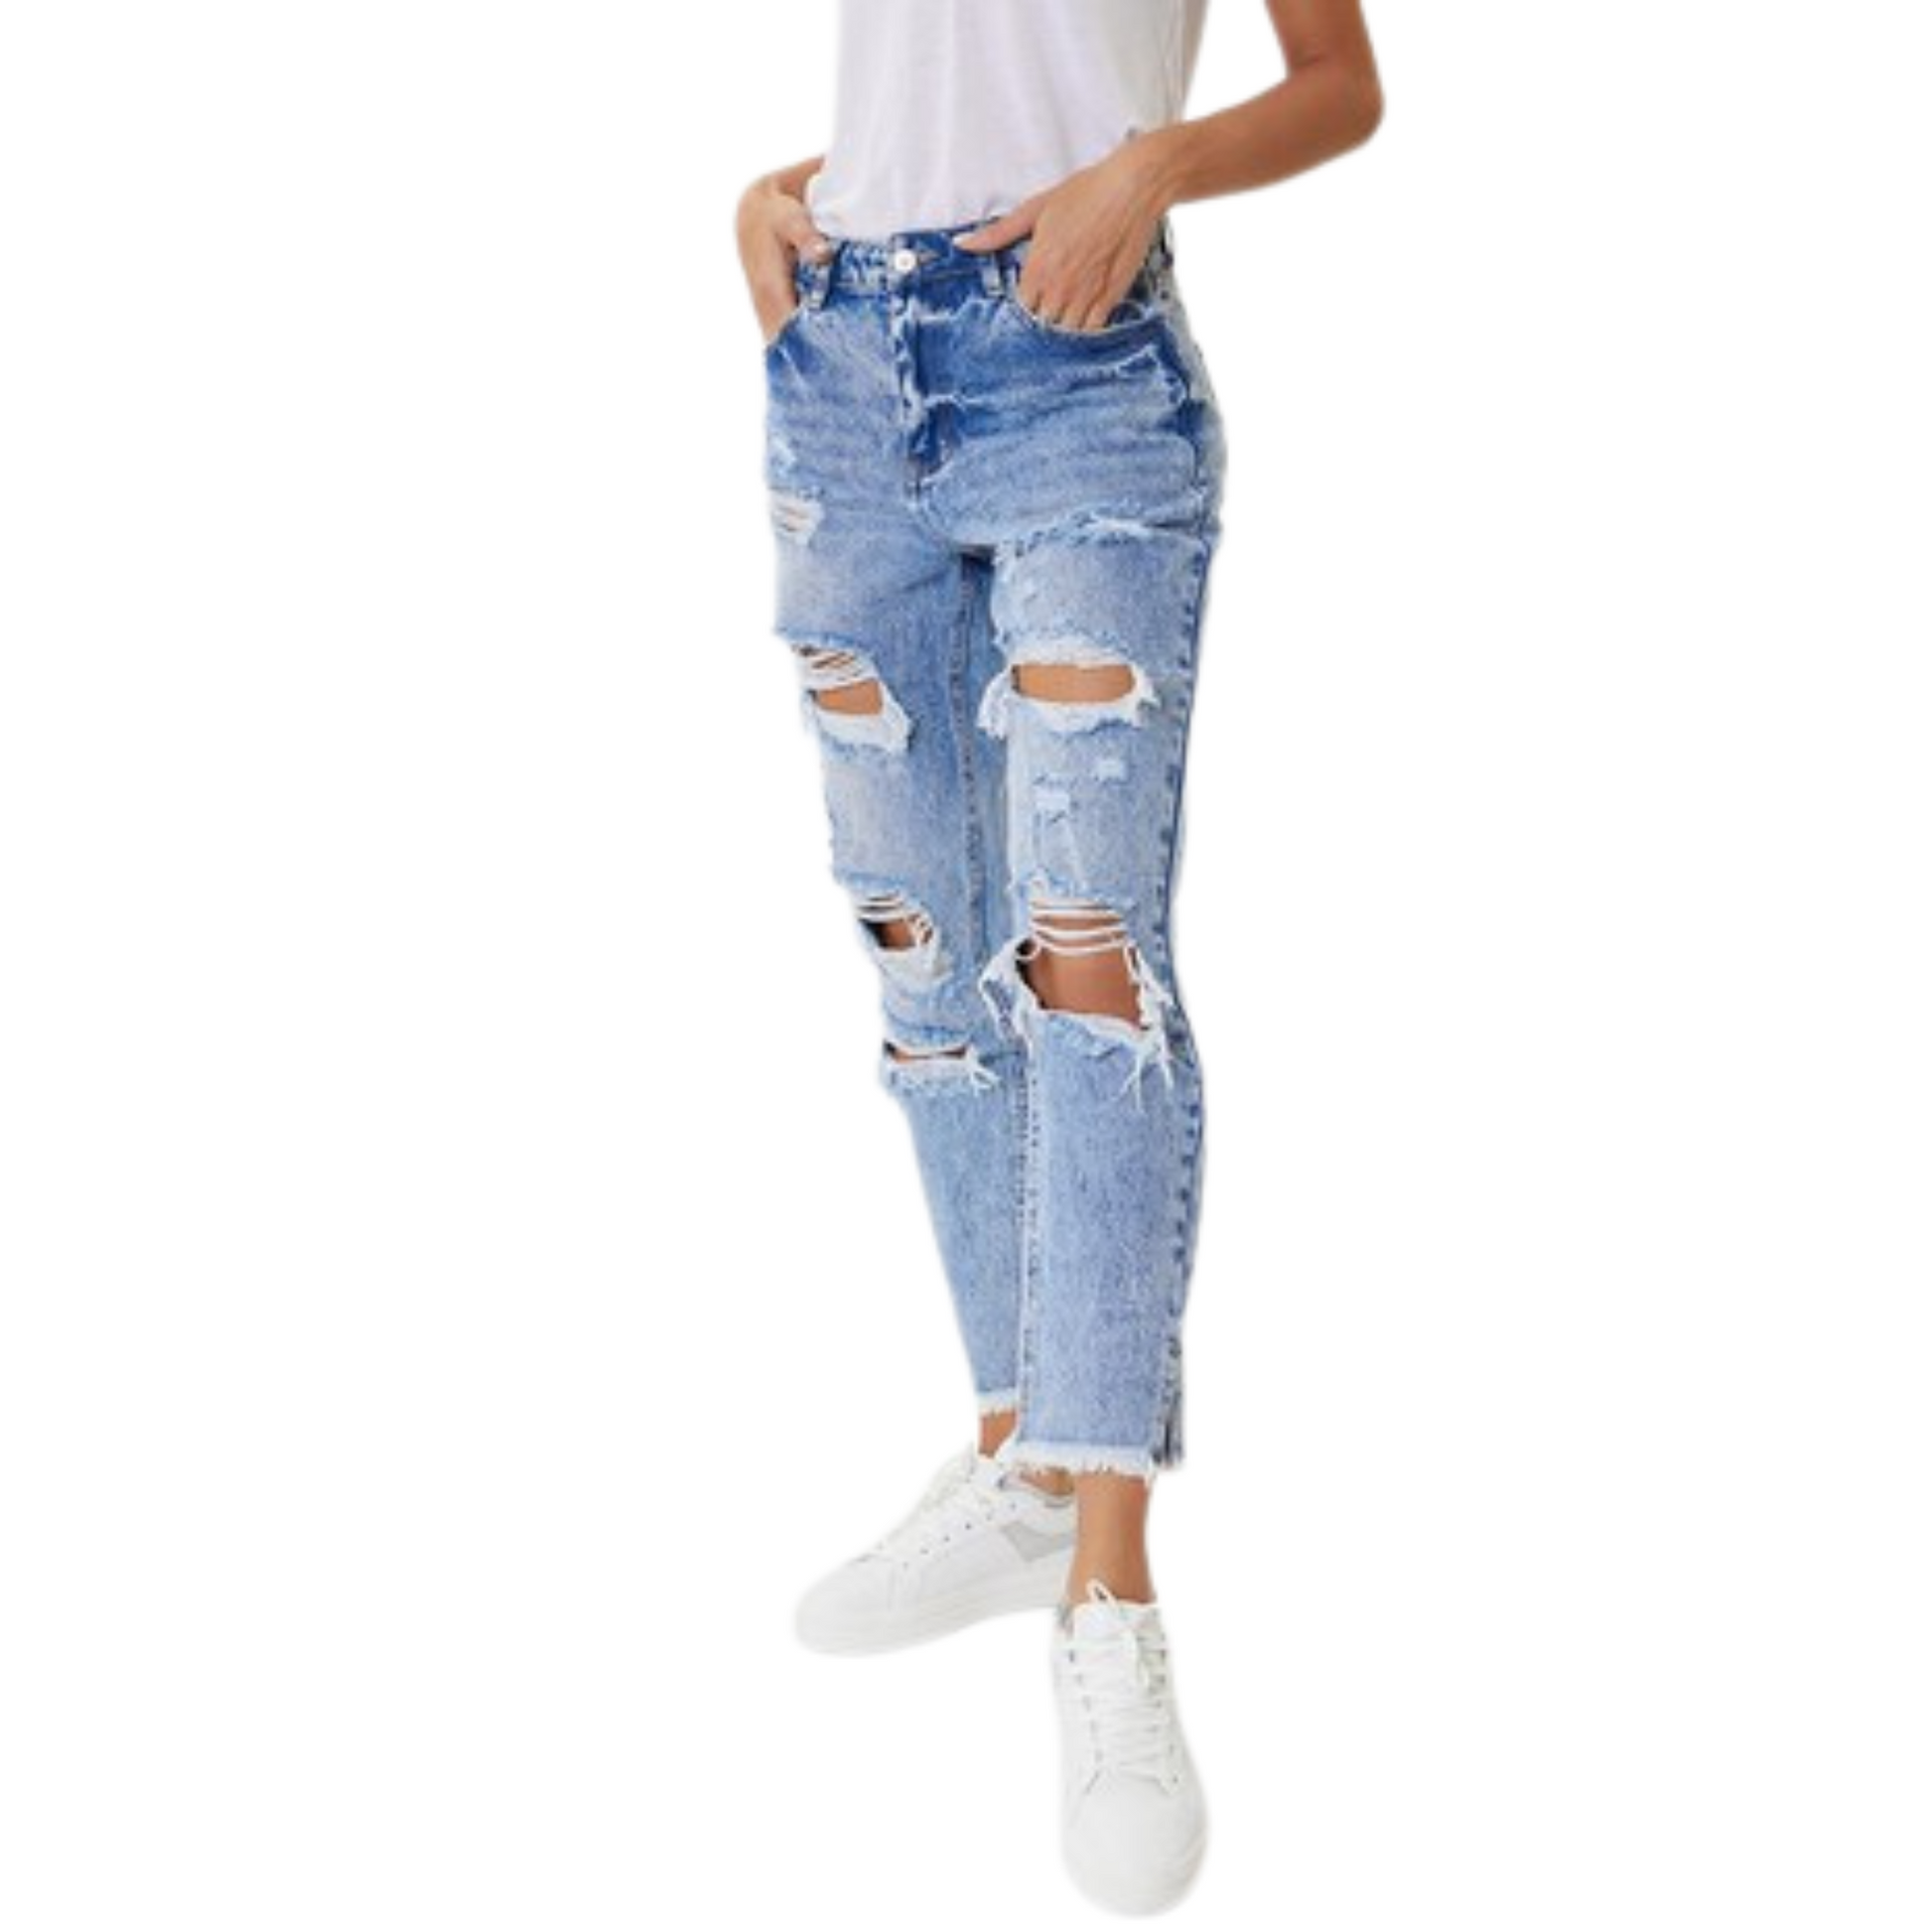 Update your denim wardrobe with these stylish High-Rise Mom Jeans. Constructed with a frayed hem and distressed detail, these cropped jeans feature a side split for a smart and sophisticated look. For a modern twist, the jeans pair perfectly with a sleek blouse.